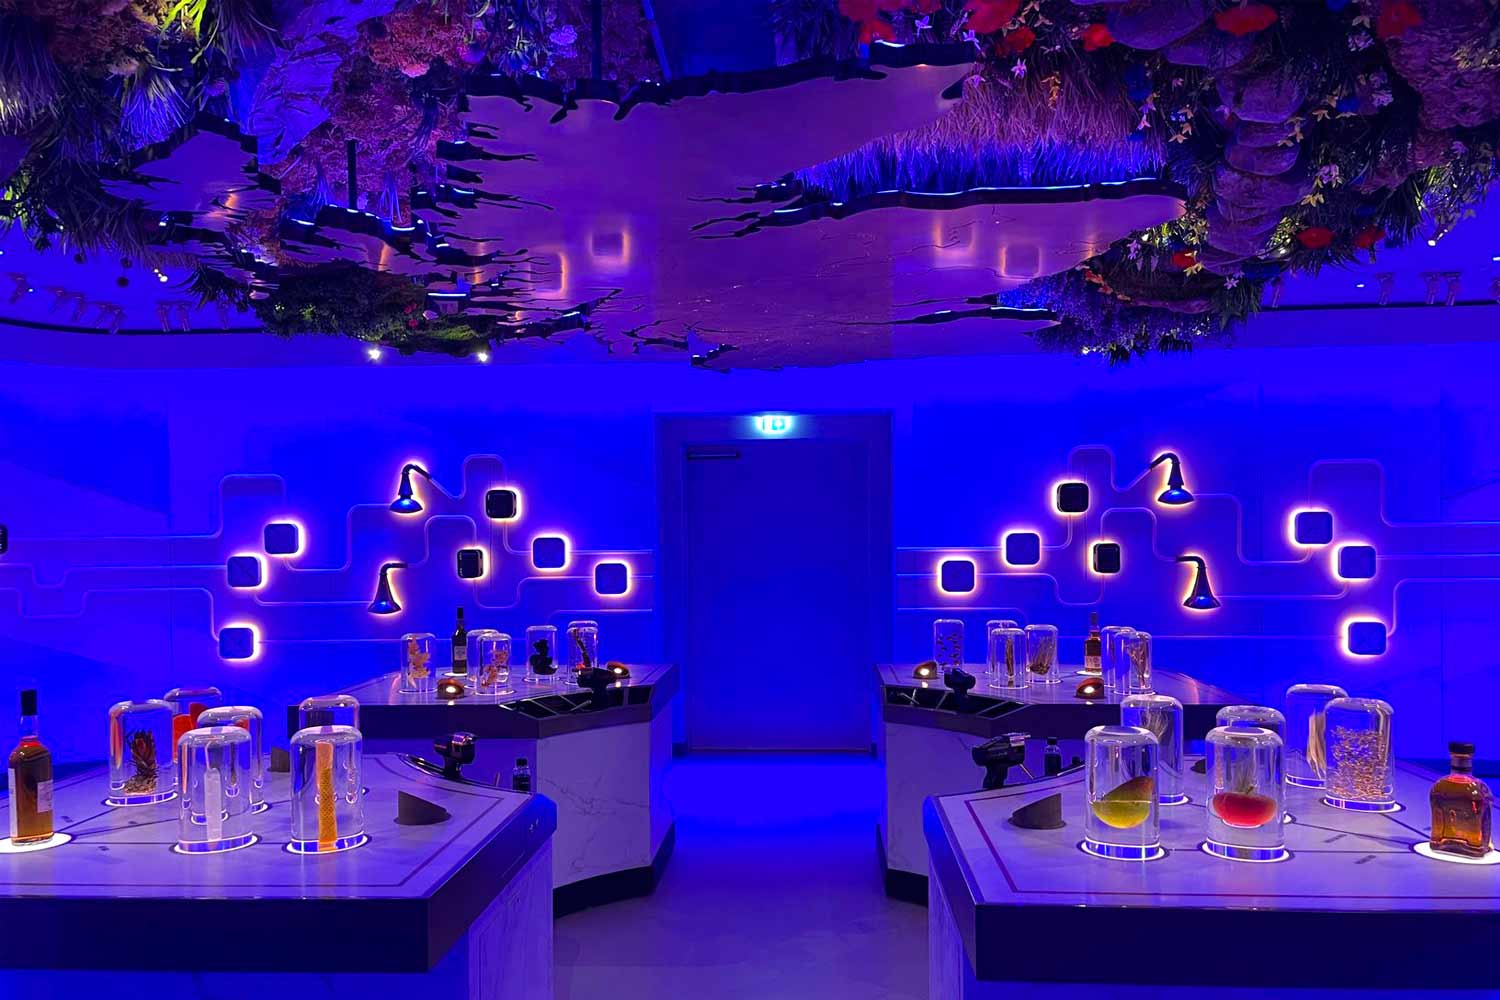 The exciting and colorful interior of The Johnnie Walker Experience on Princes Street in Edinburgh.